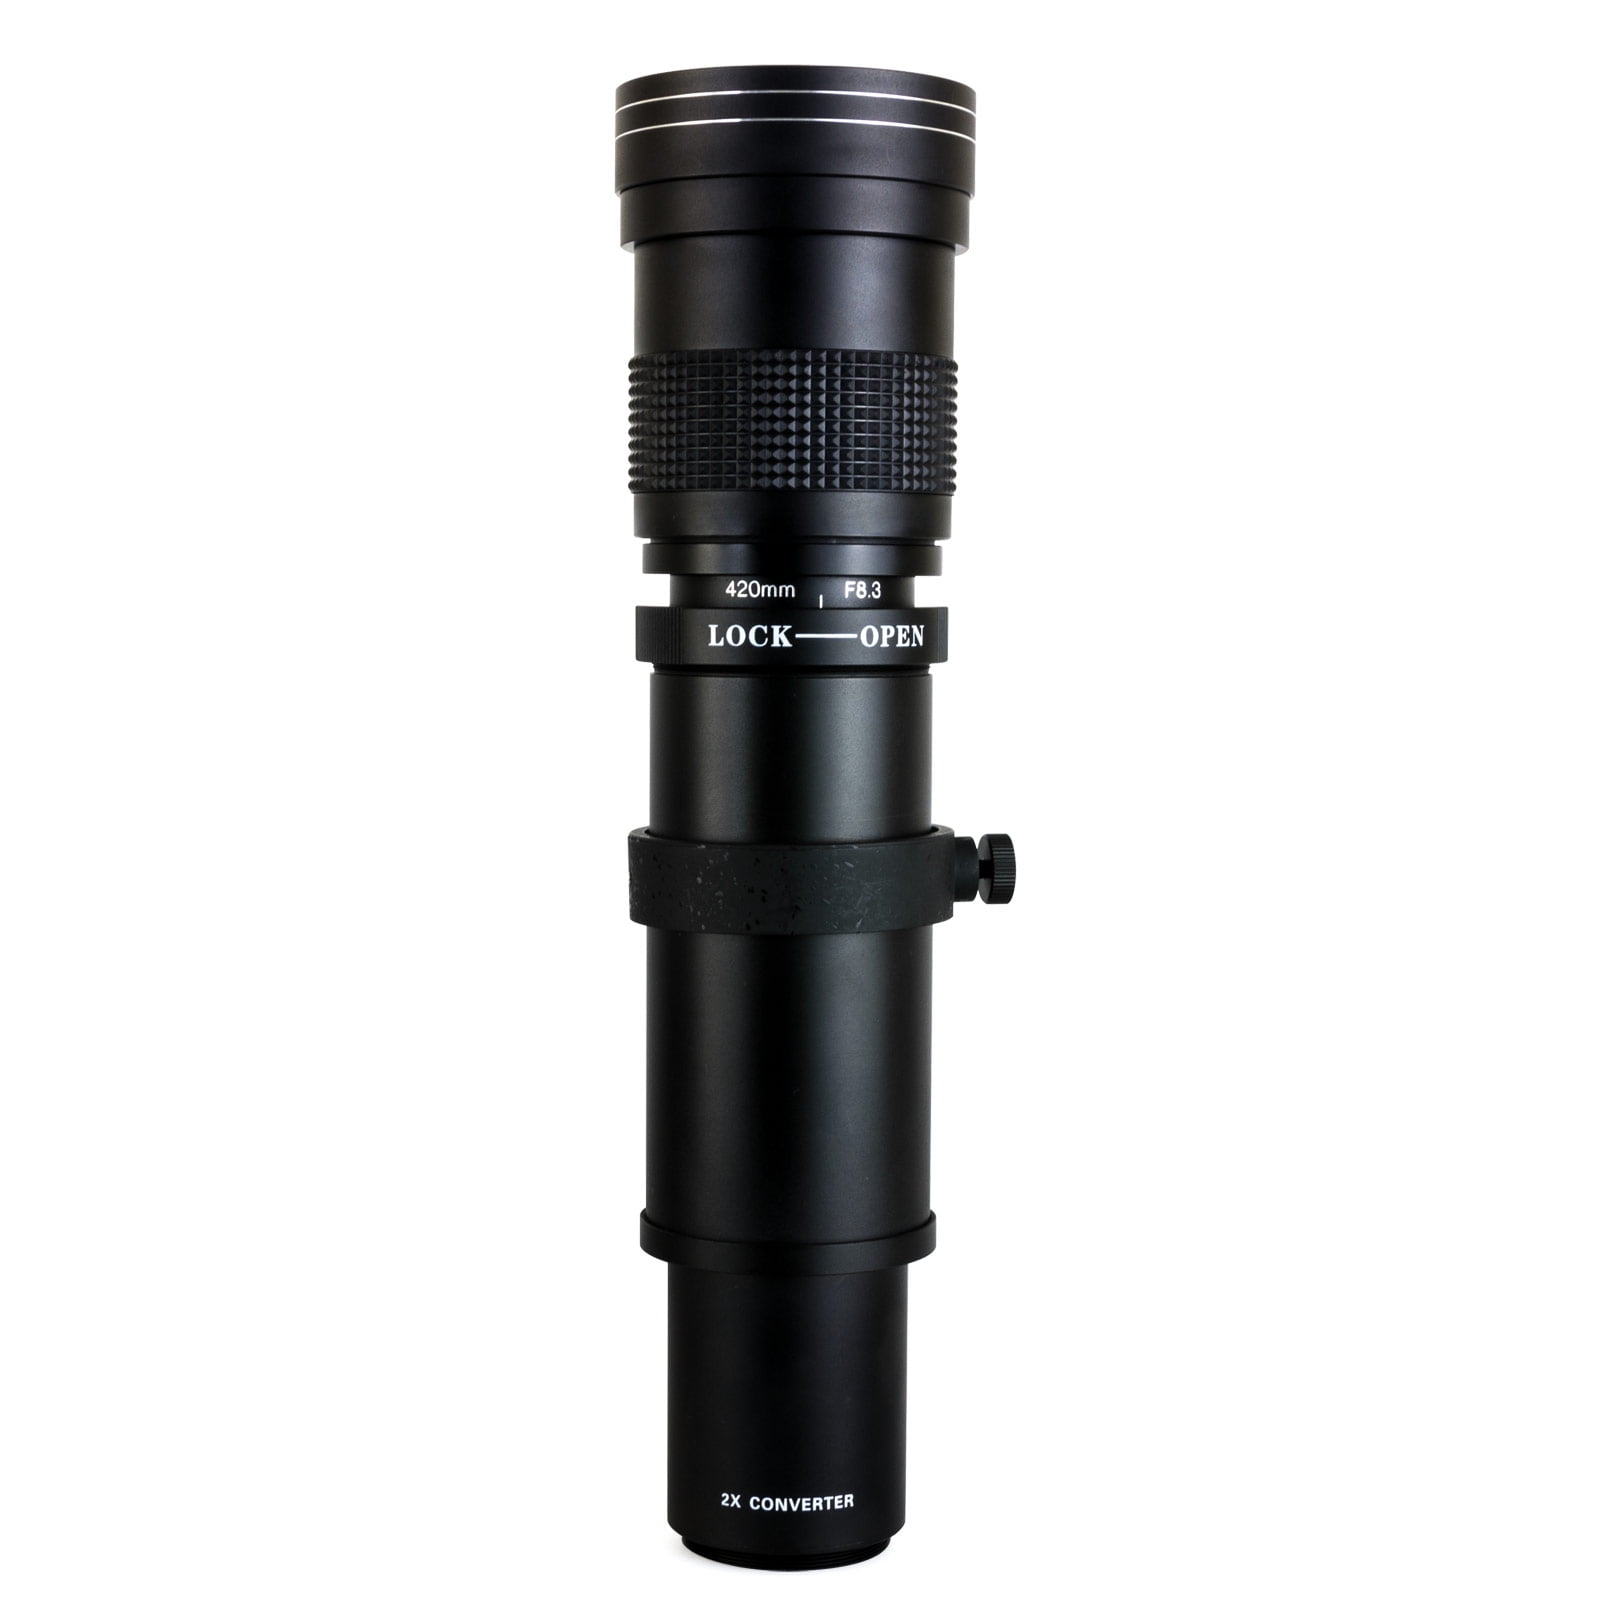 T6s 5D 6D 70D T6 T5i T7i 60D 7D T6i 7D Mark II T5 SL1 & SL2 Digital SLR Cameras Opteka 650-1300mm f/8-16 High Definition Super Telephoto Zoom Lens for Canon EOS 80D 77D 